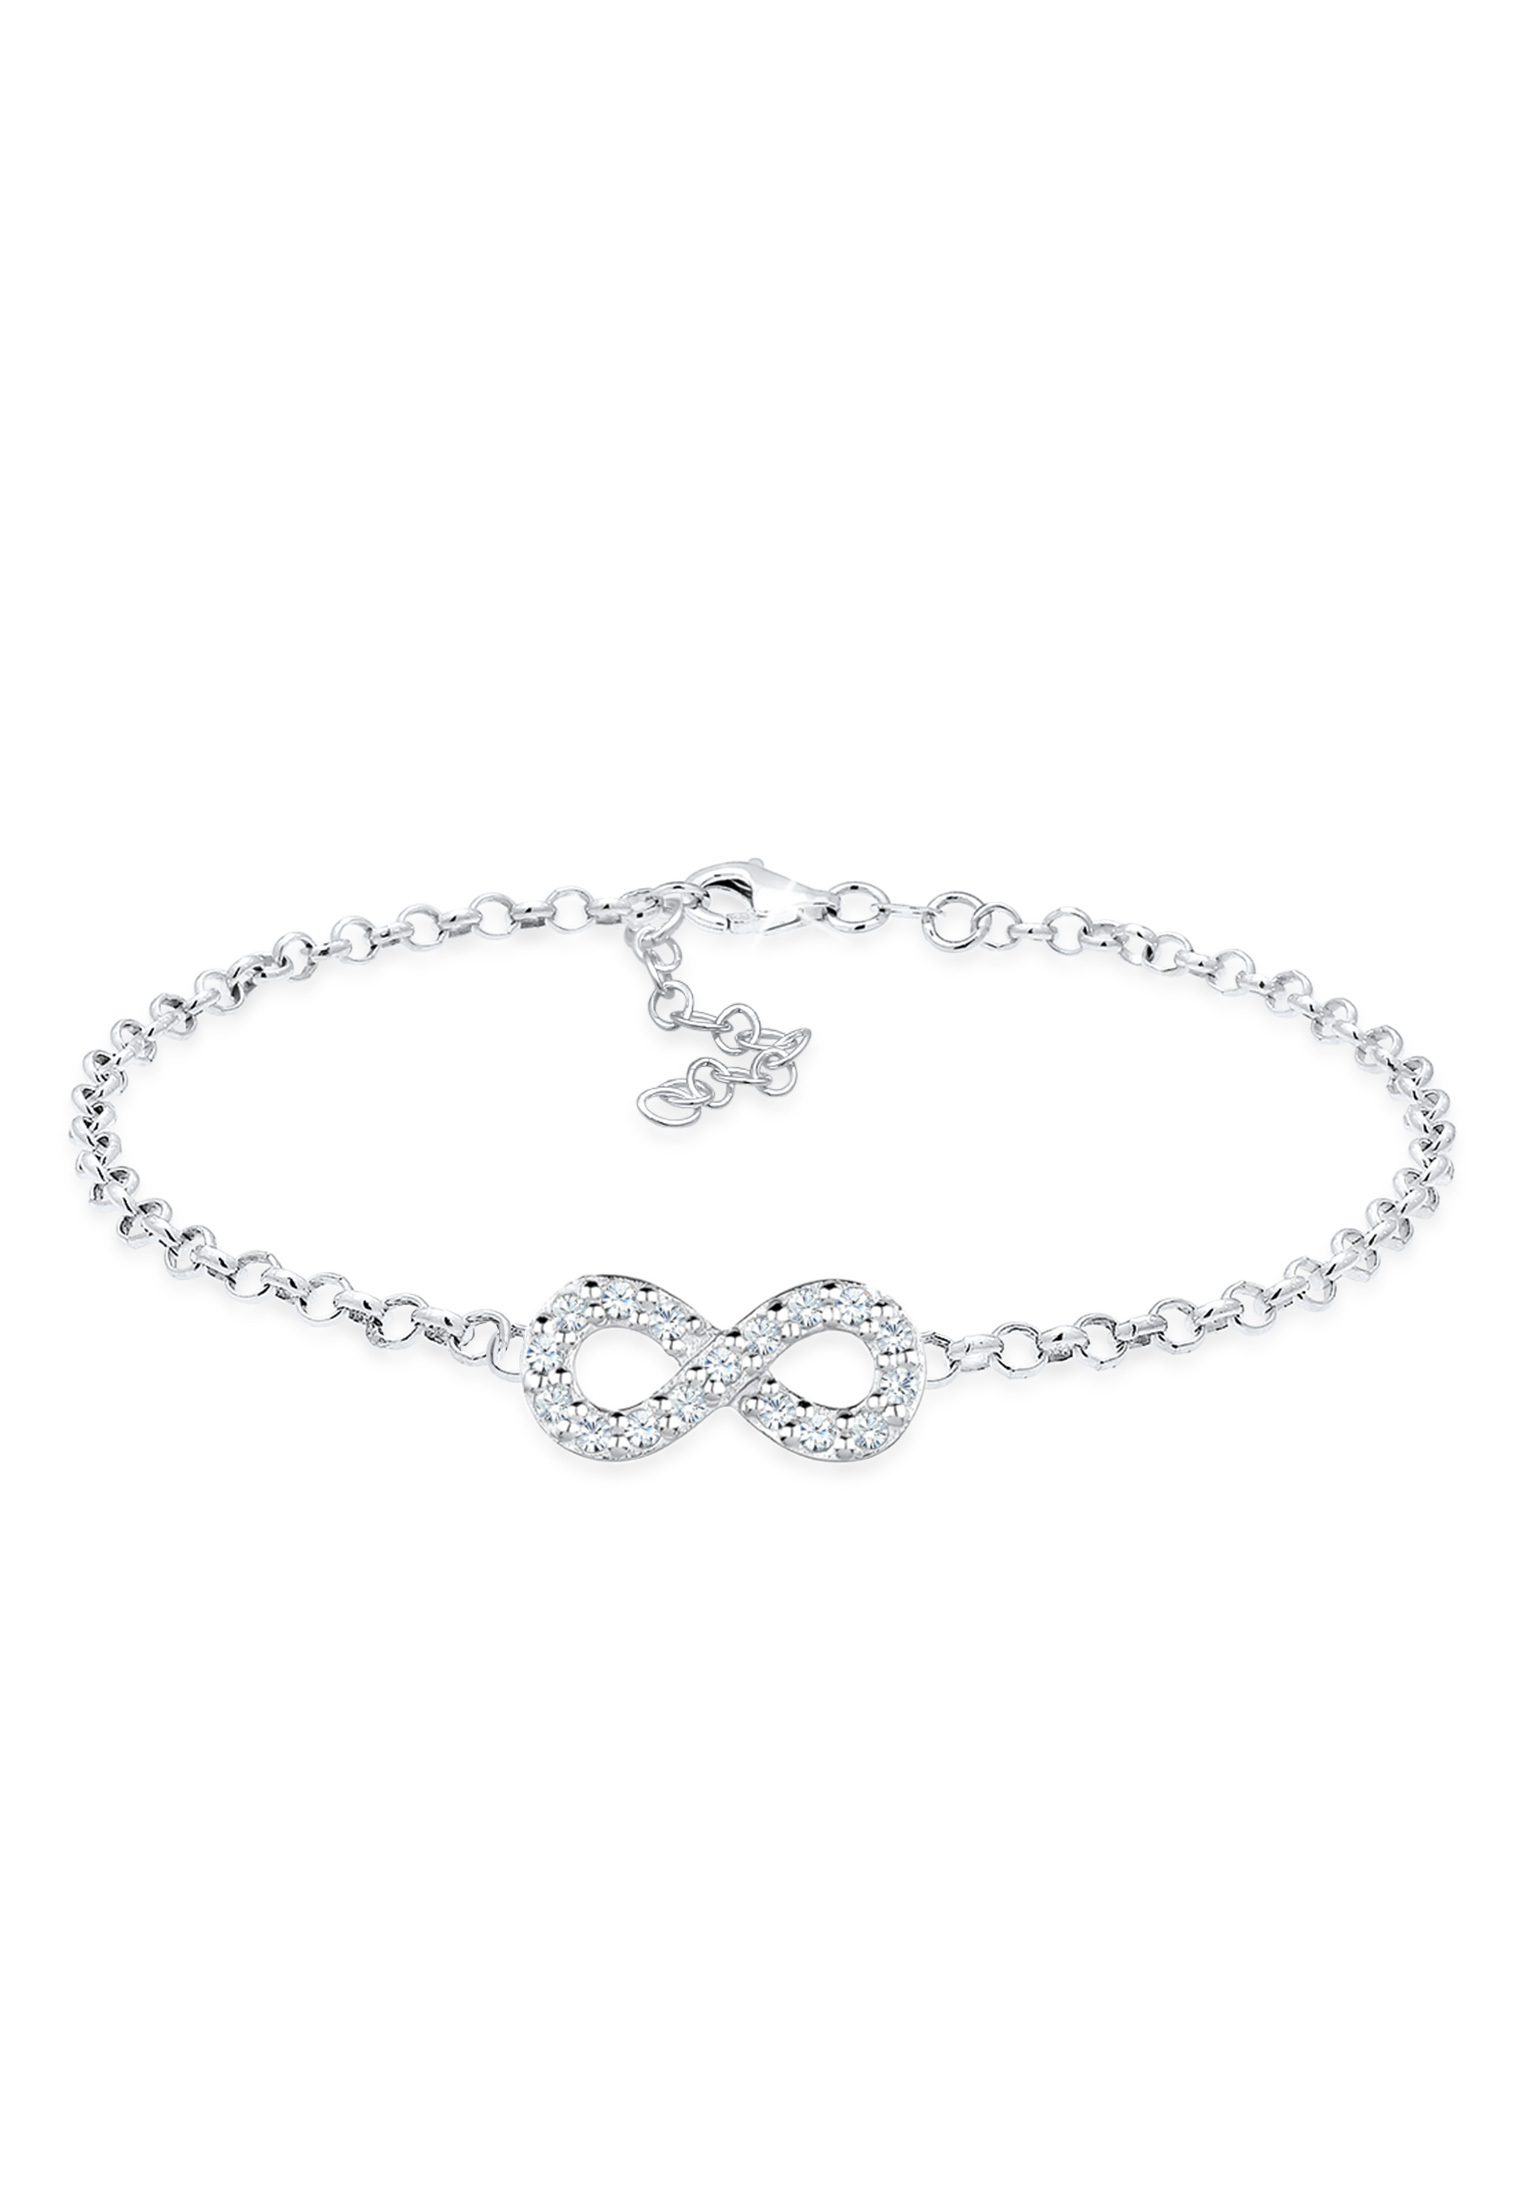 Armband Infinity | Kristall ( Weiß ) | 925 Sterling Silber